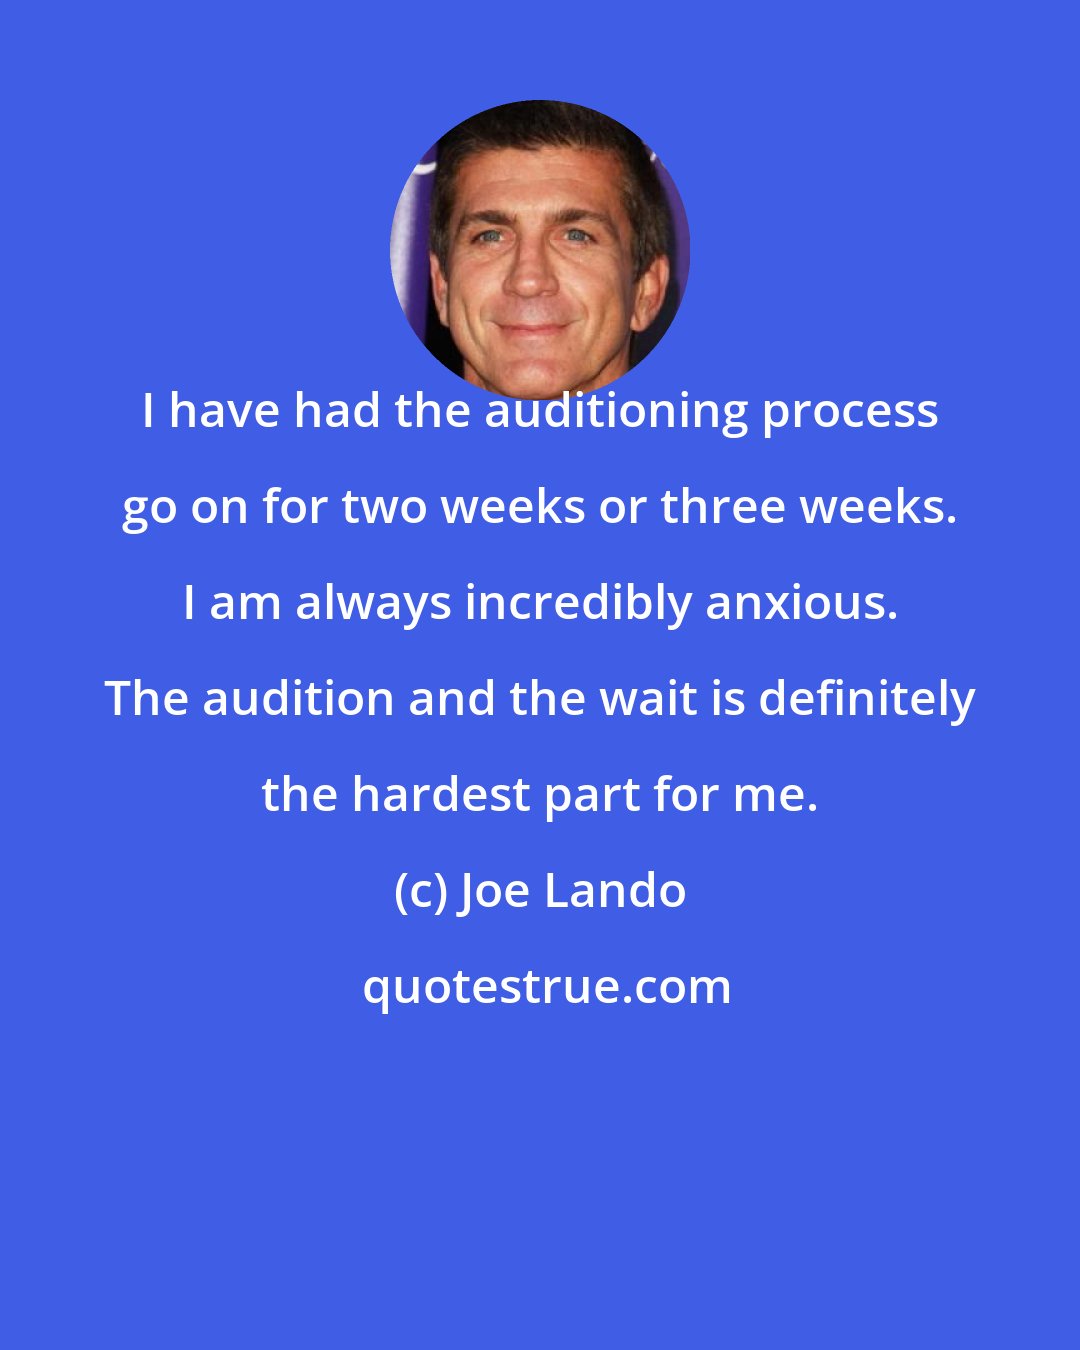 Joe Lando: I have had the auditioning process go on for two weeks or three weeks. I am always incredibly anxious. The audition and the wait is definitely the hardest part for me.